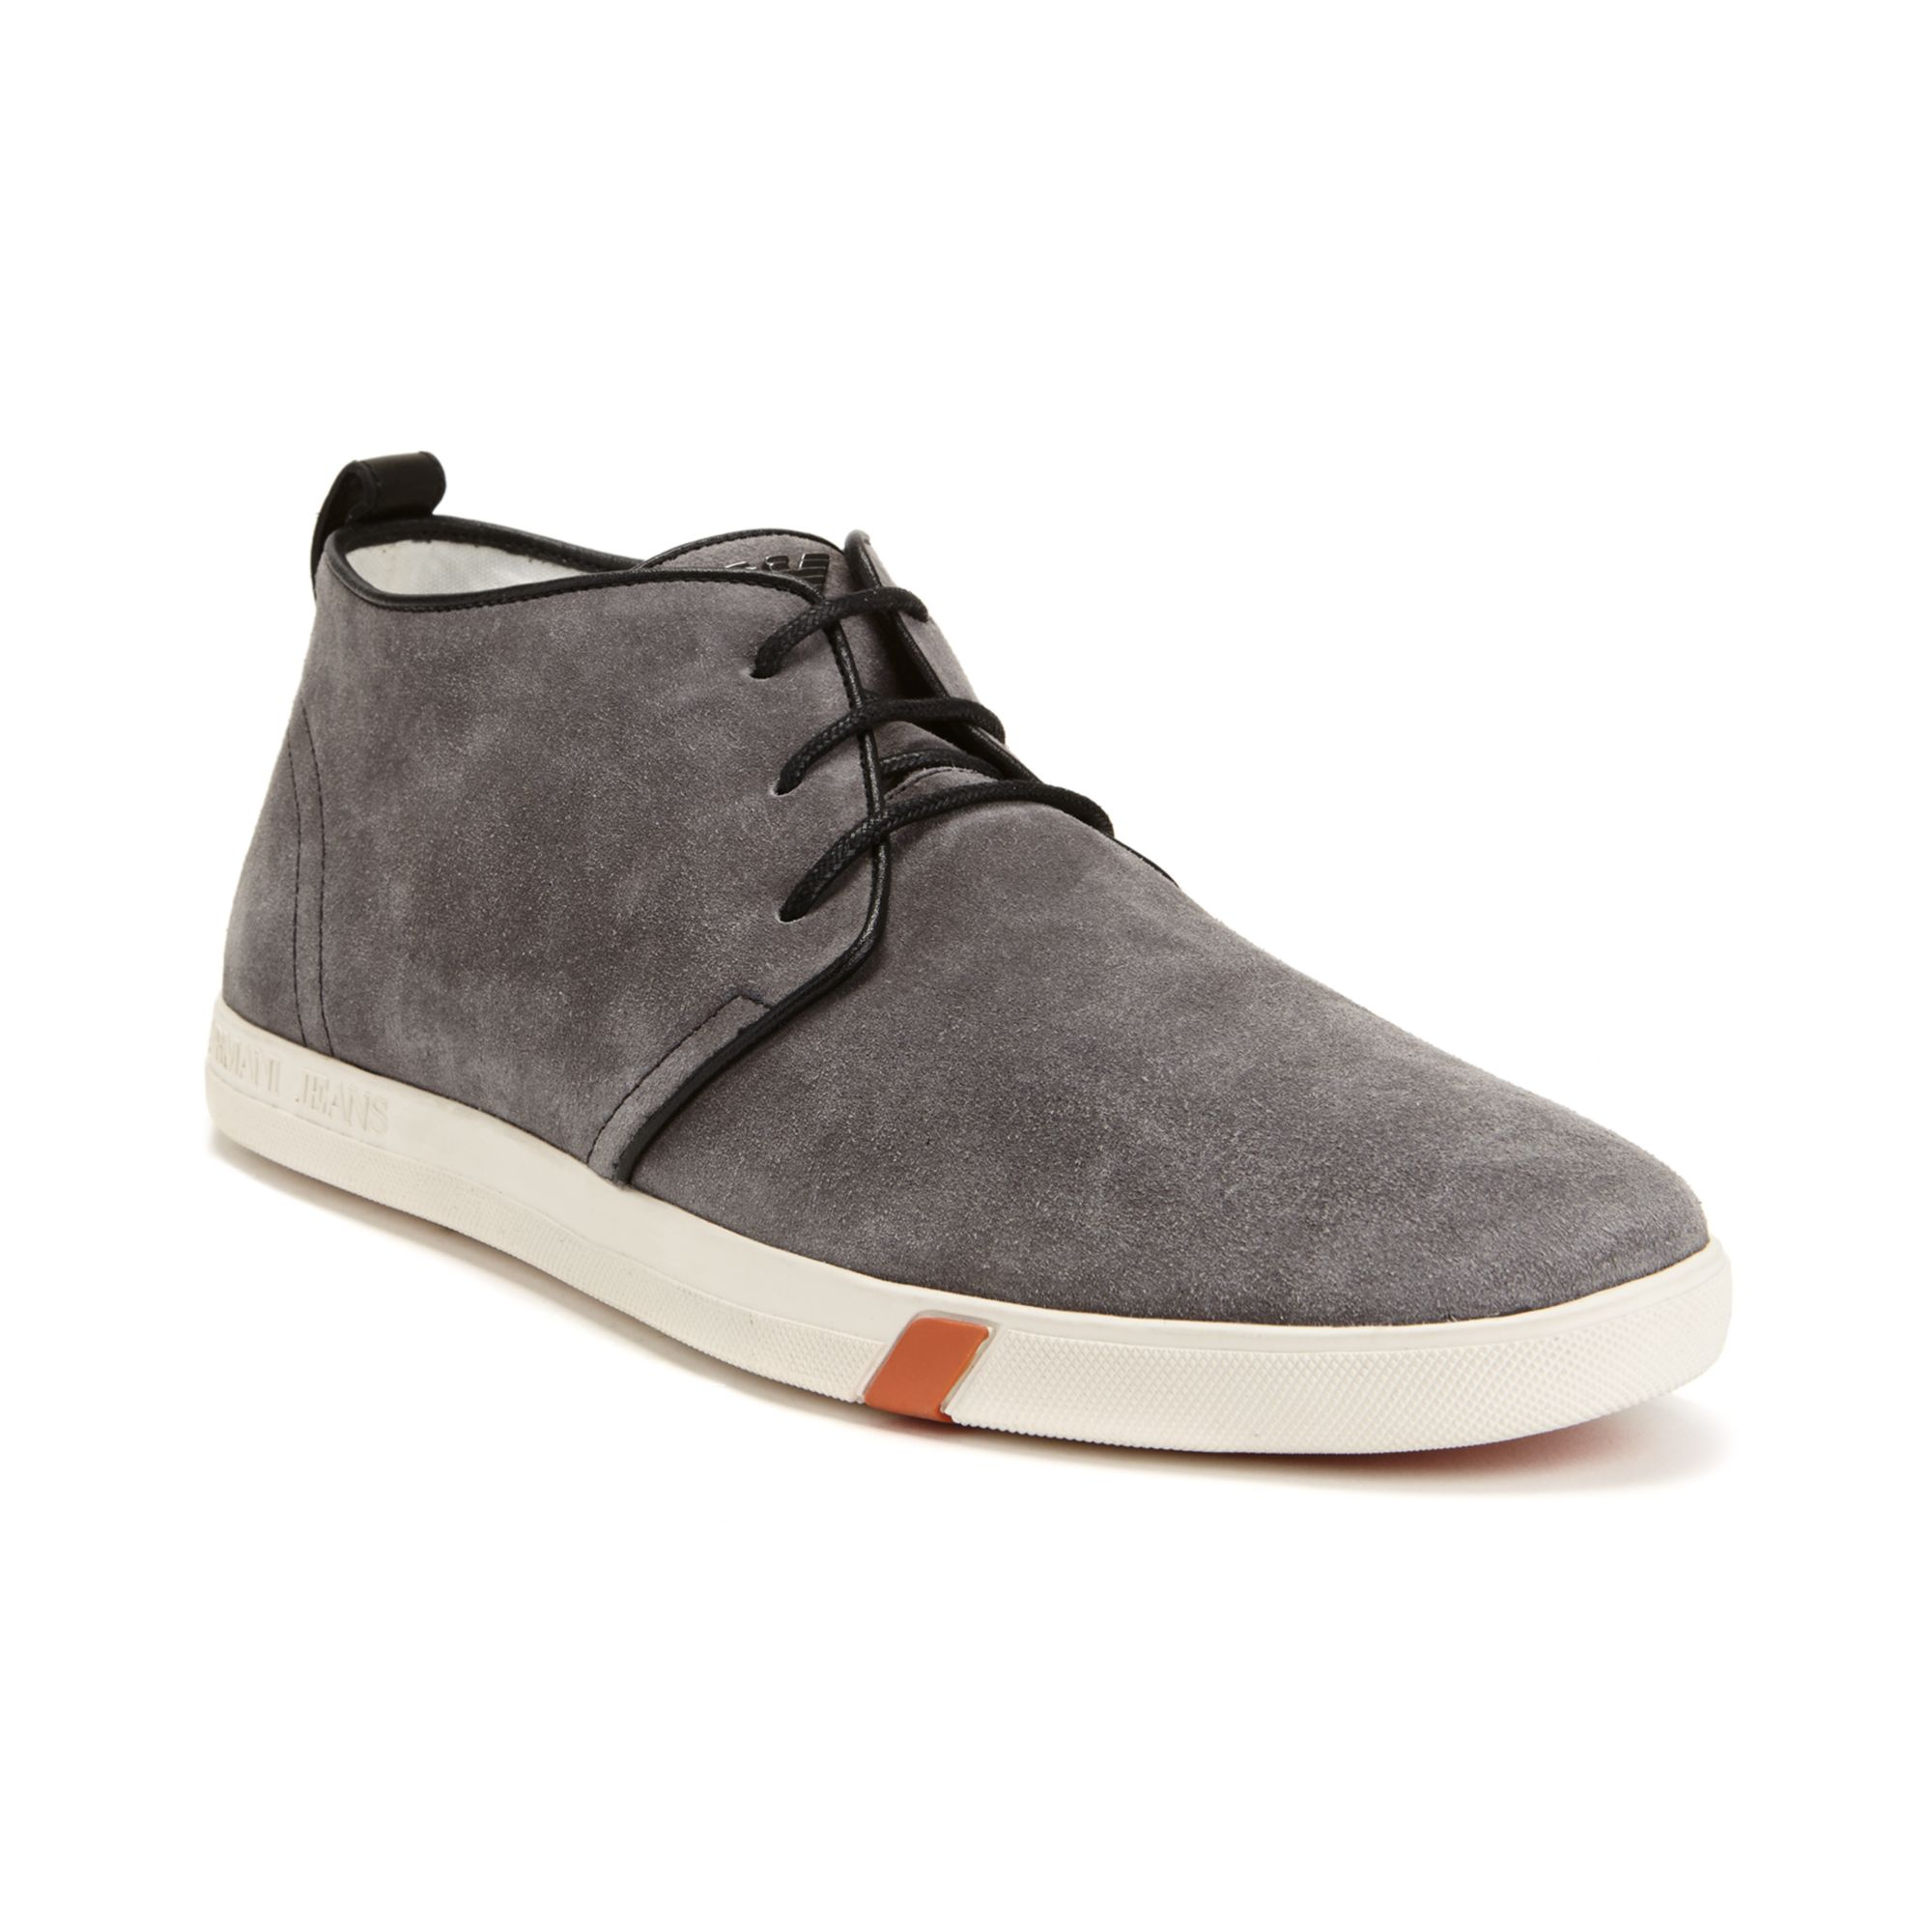 Armani Jeans Suede Chukka Sneakers in Grey (Gray) for Men - Lyst